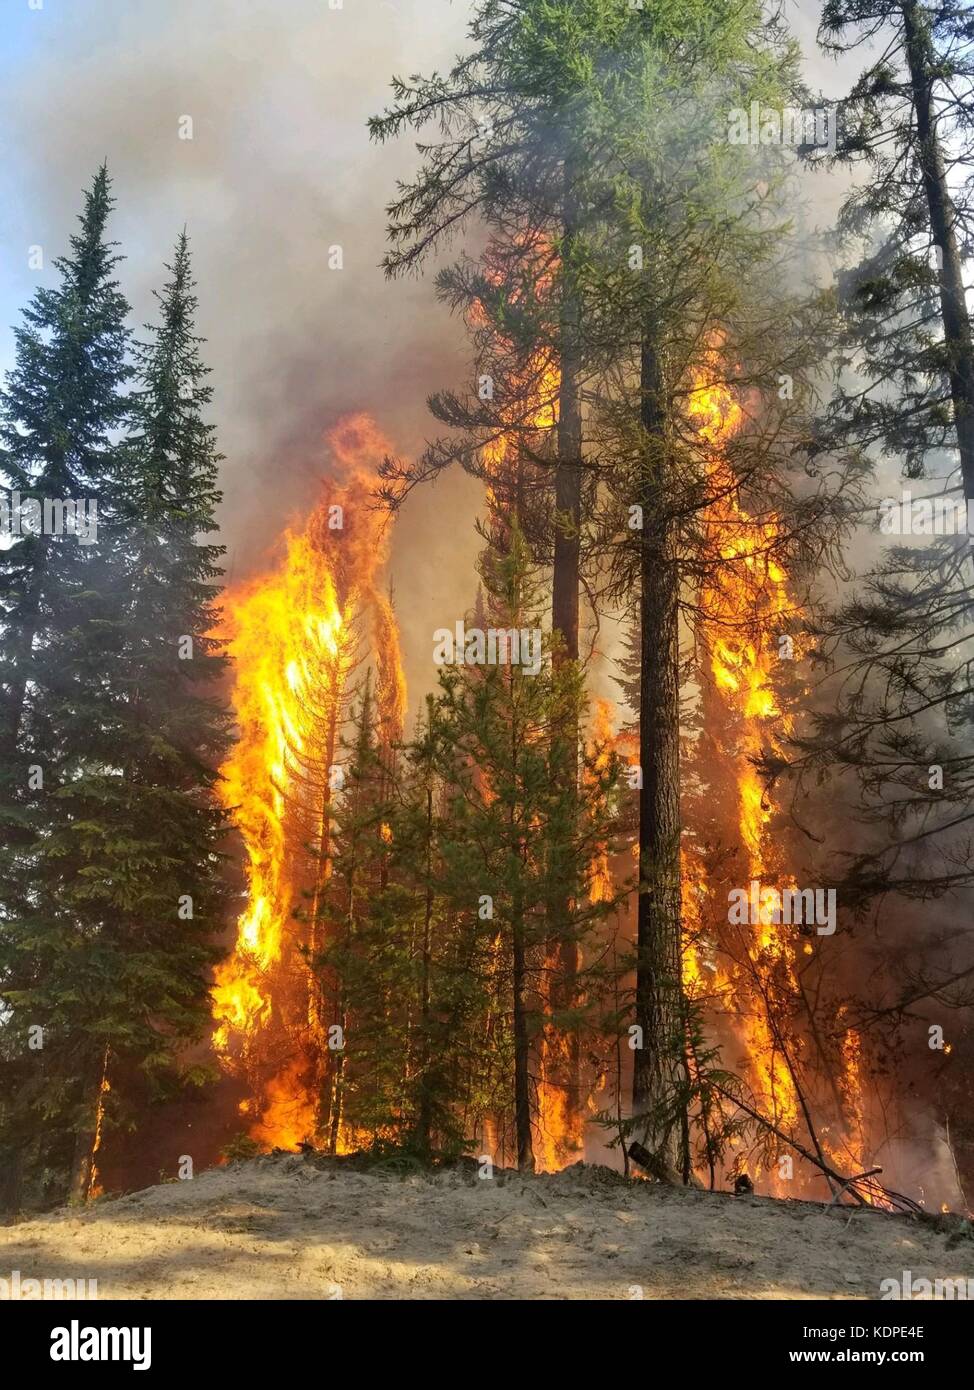 Flames consume old growth cedar trees in the Caribou Fire burning in the Kootenai National Forest September 13, 2017 near Libby, Montana. Stock Photo